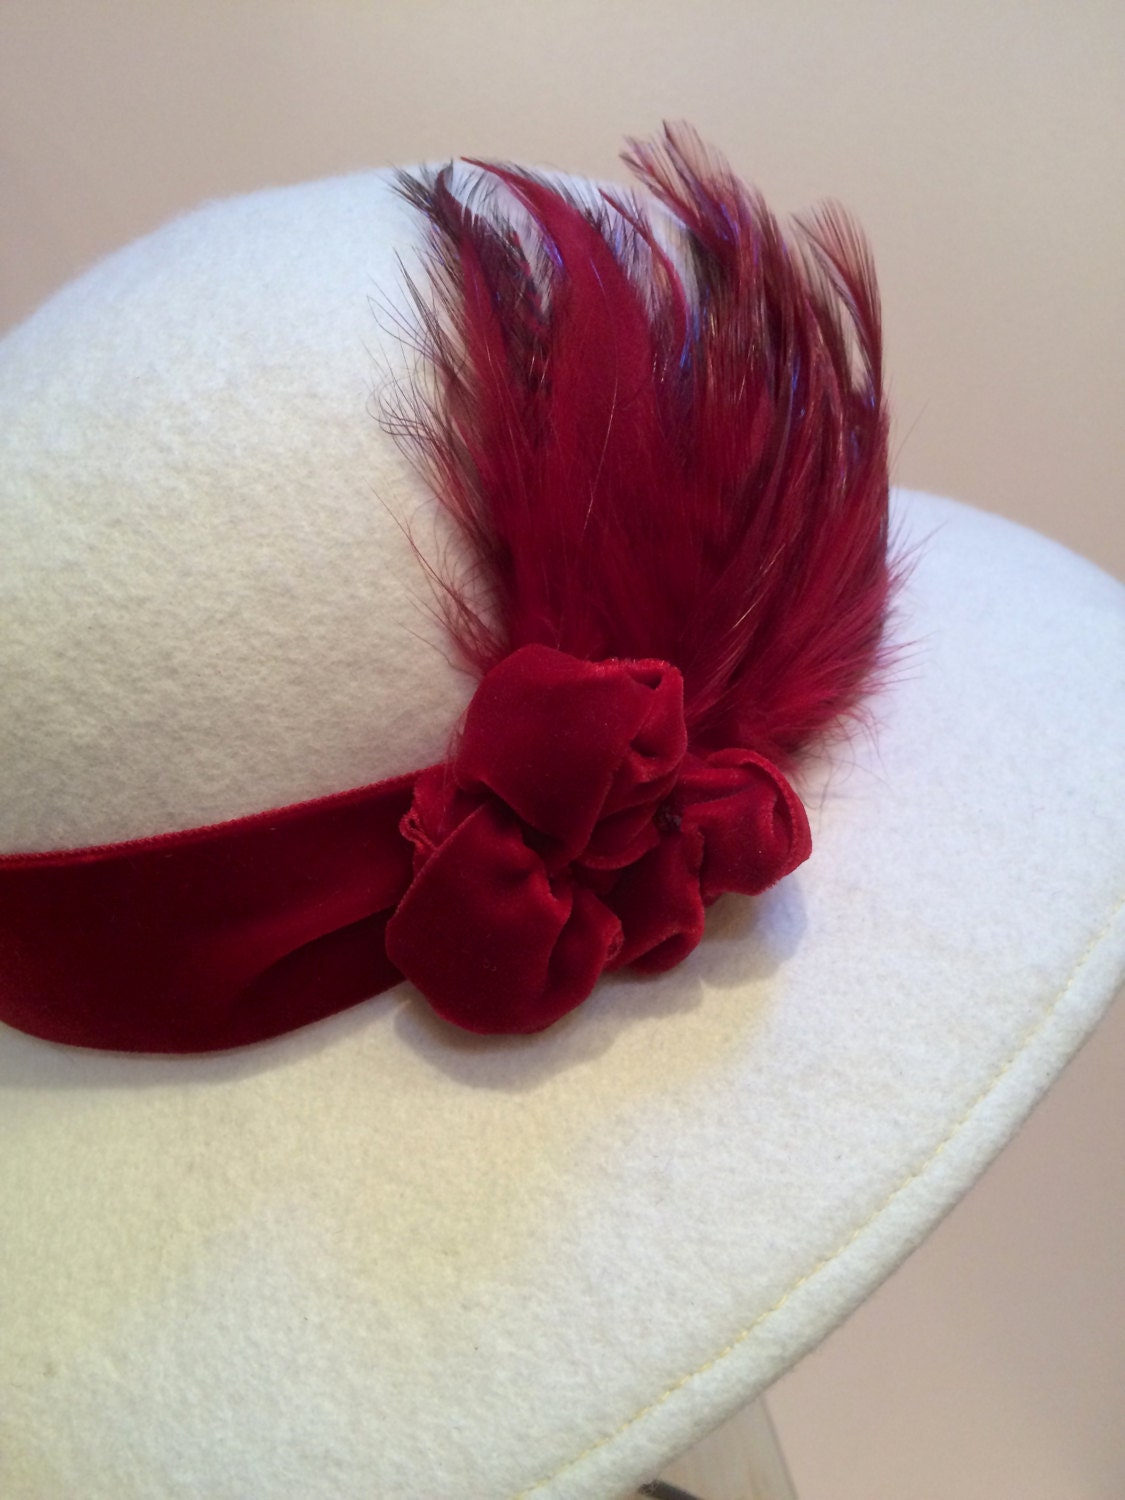 White wool felt hat, Hat with Deep Red Velvet Ribbon trim and Deep Red feathers, Valentine's Day Hat, Holiday Winter Hat-Chic-Christmas hat